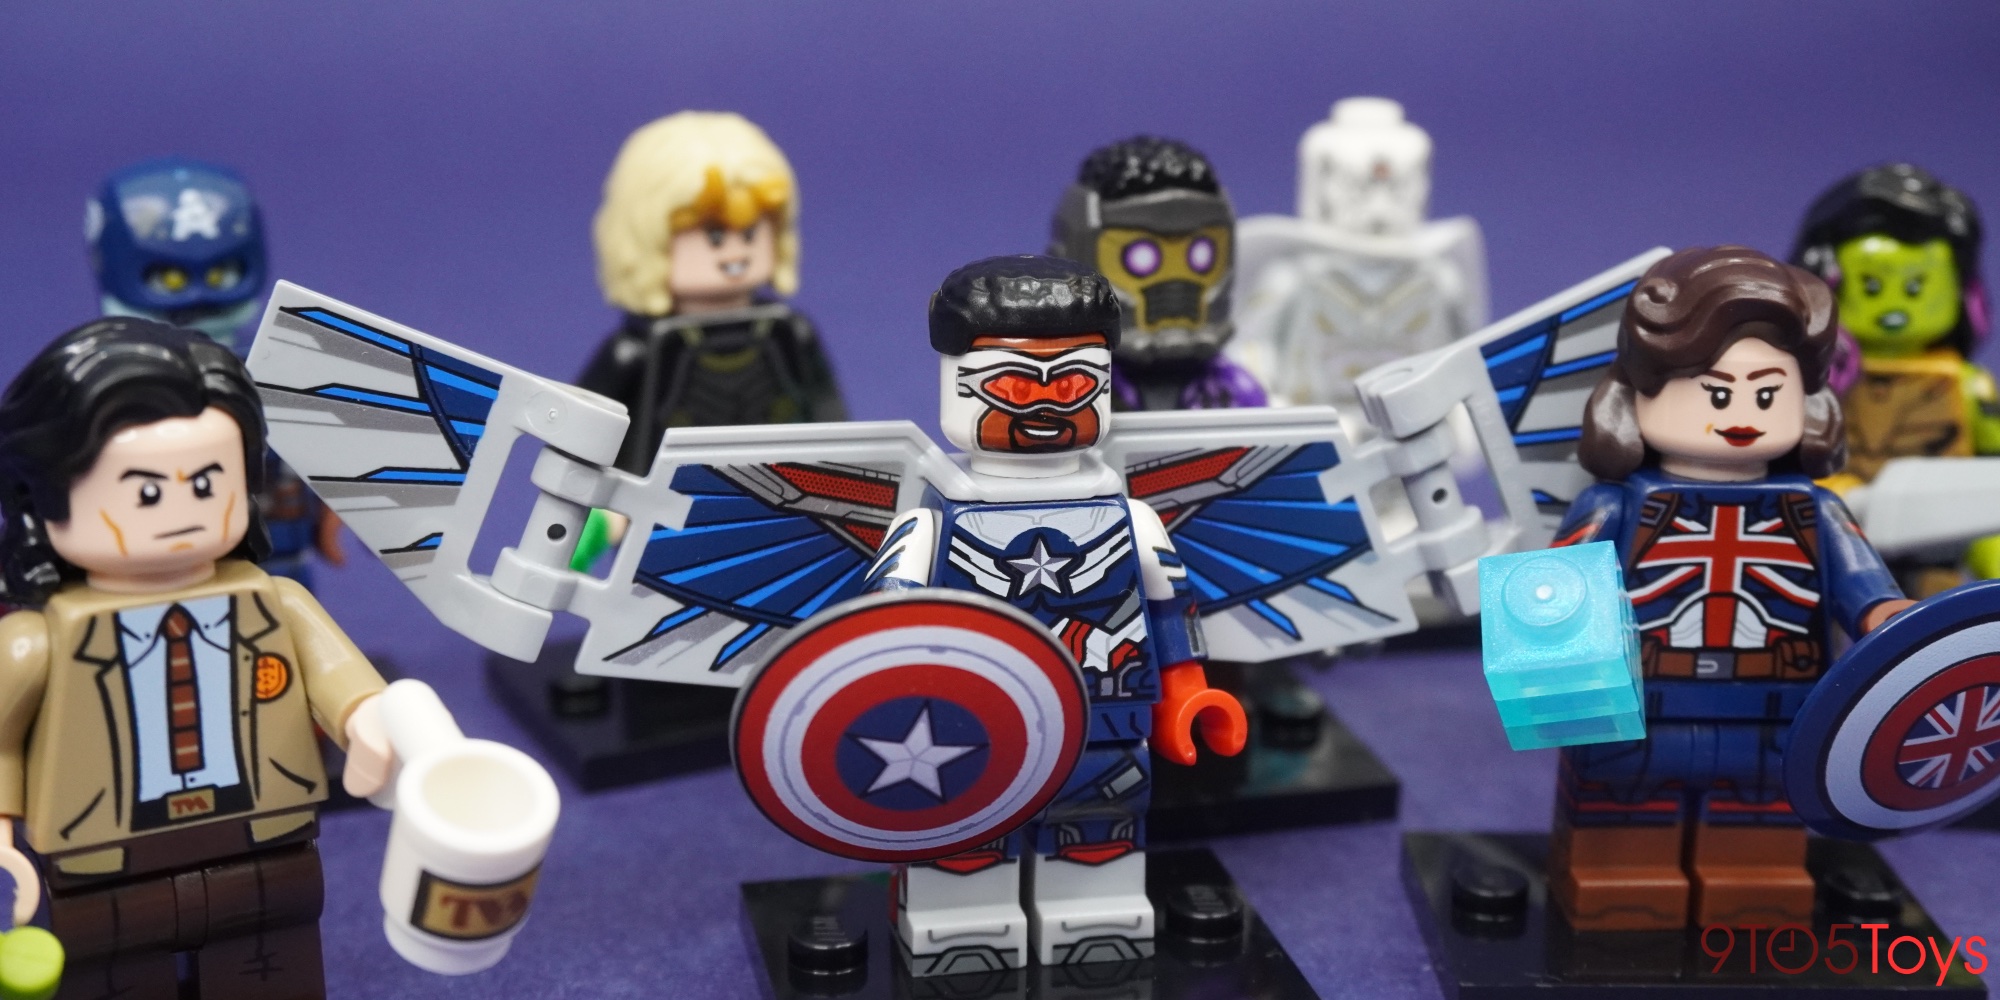 LEGO Marvel CMF Series 2 includes 12 characters